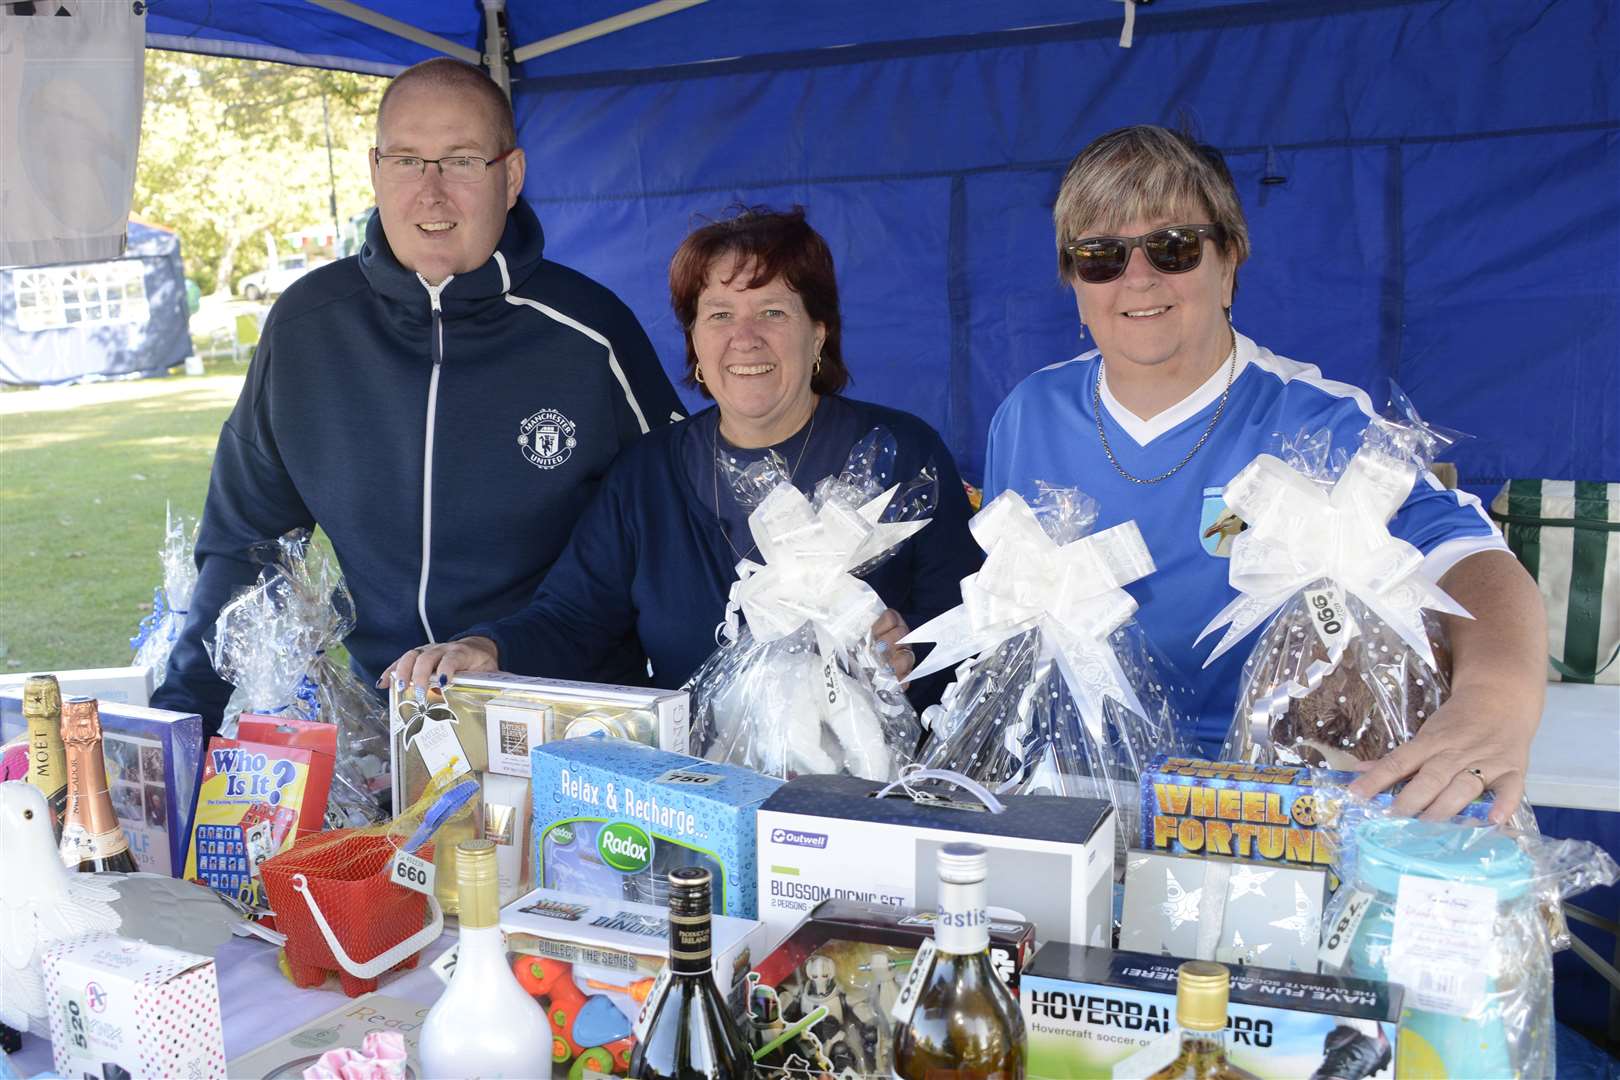 The South East Gulls Disability FC stall at Dover Big Urban. Pictured are Craig Hucksted,Wendy Hucksted and Julie Harris.Picture: Paul Amos